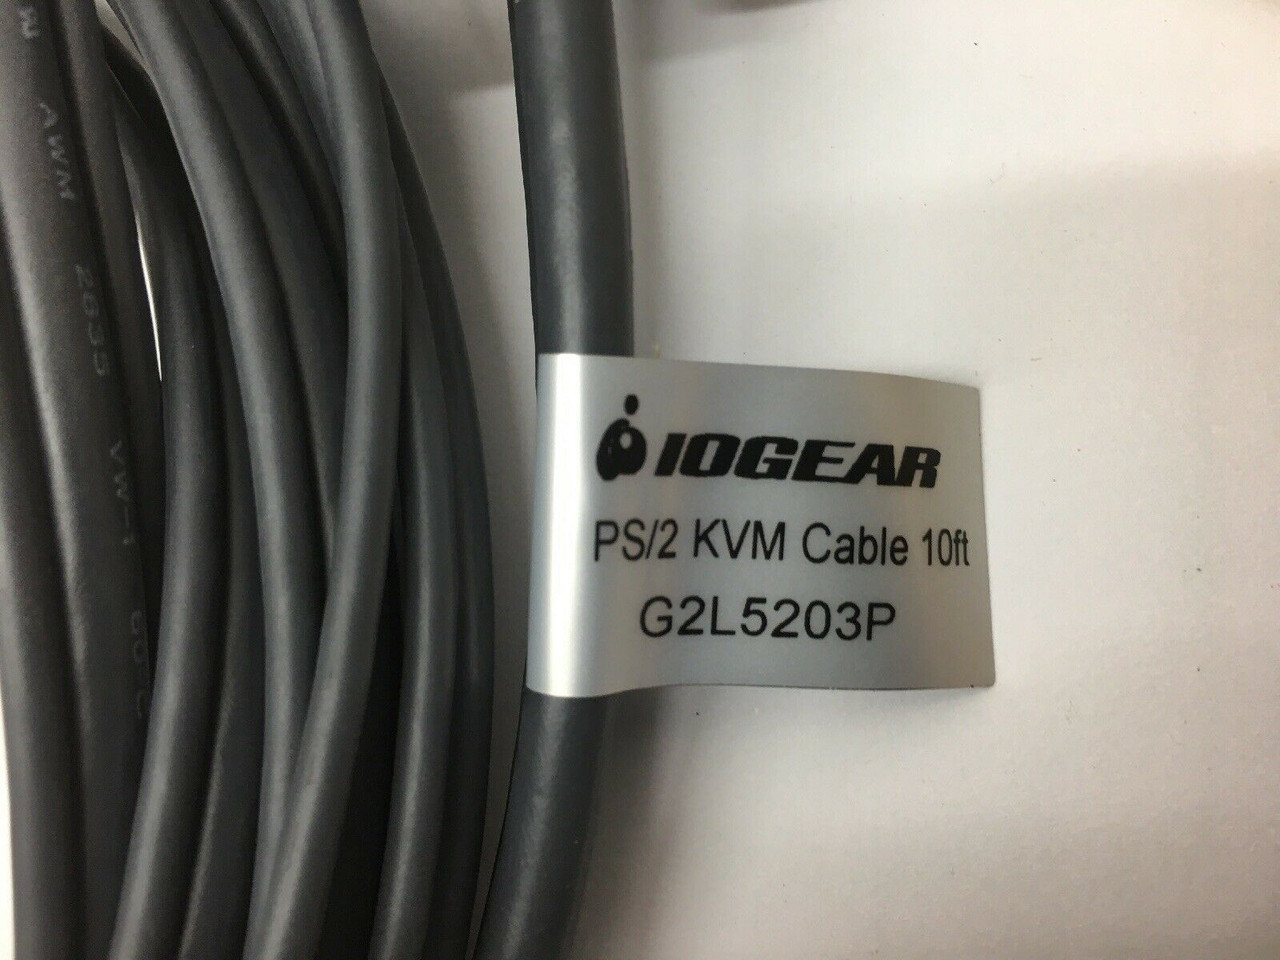 PS/2 KVM Cable 10 ft. G2L5203P IOGear For Use with GCS1716